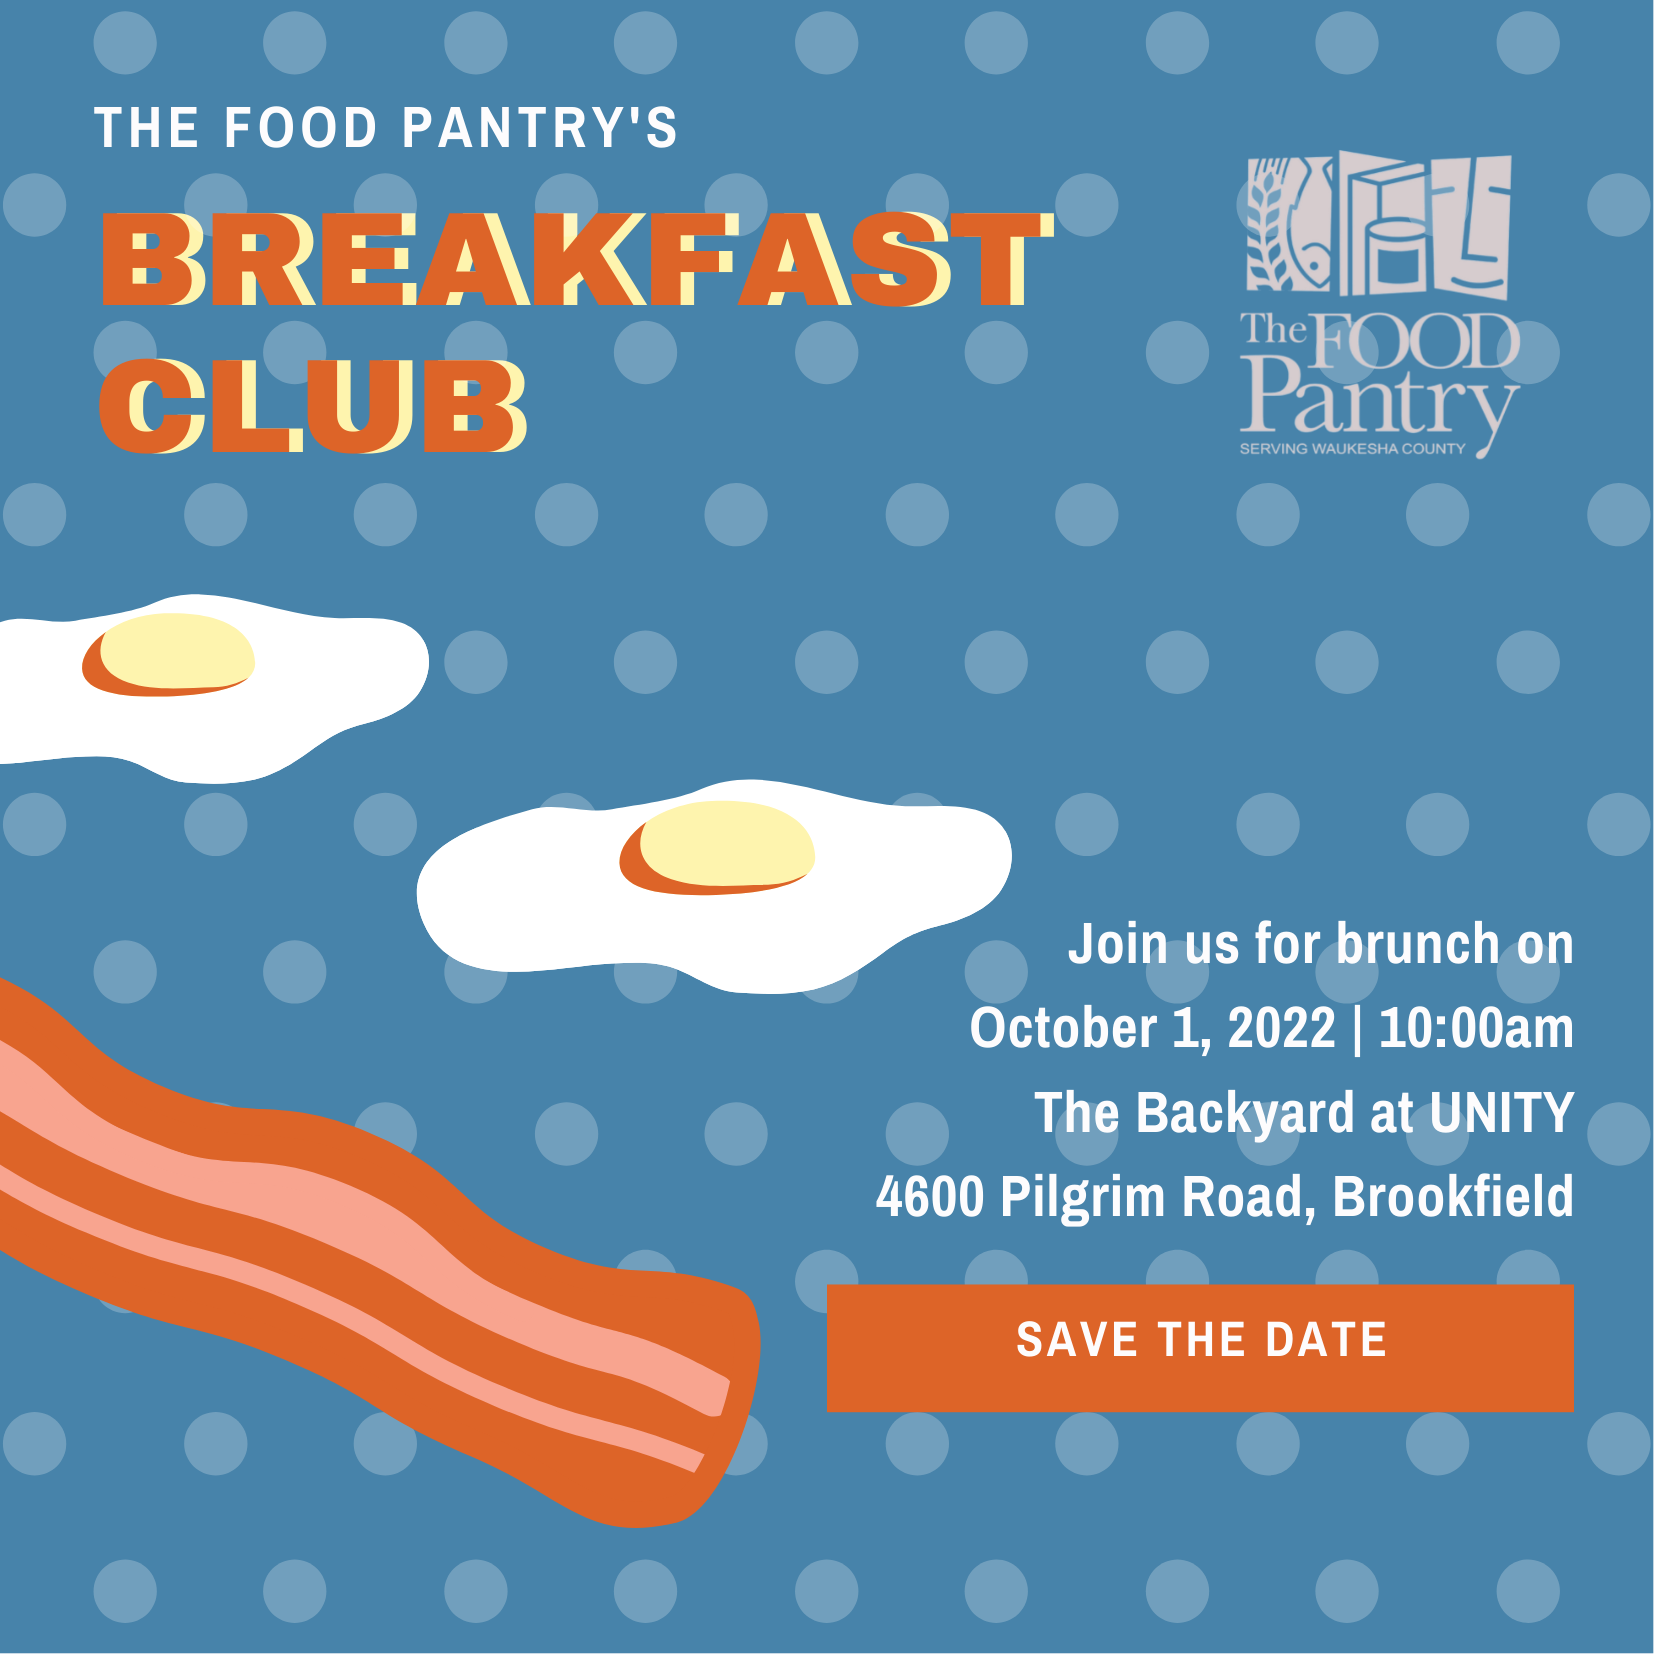 Join the Breakfast Club on October 1